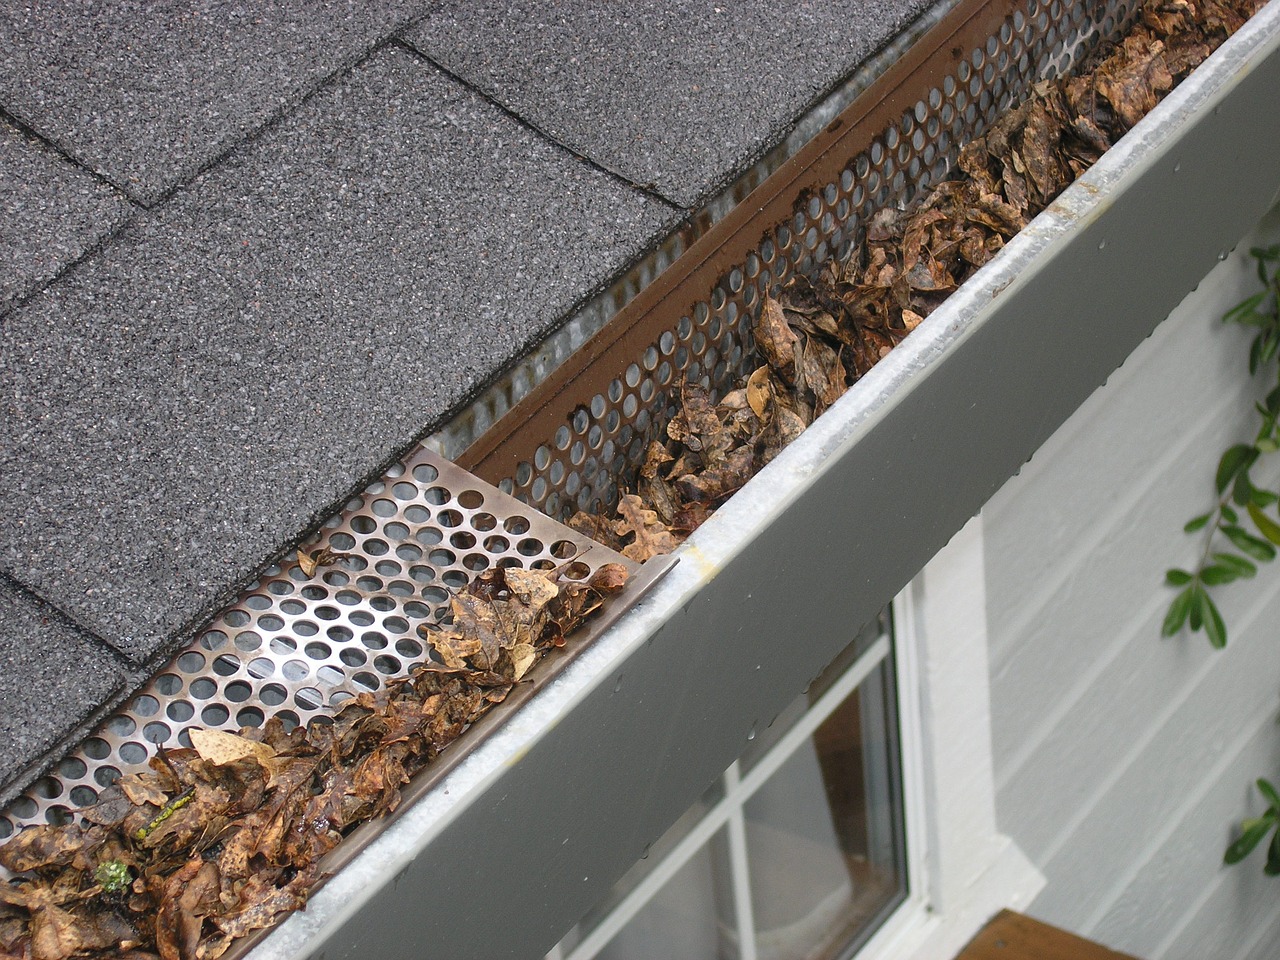 How often to clean gutters.